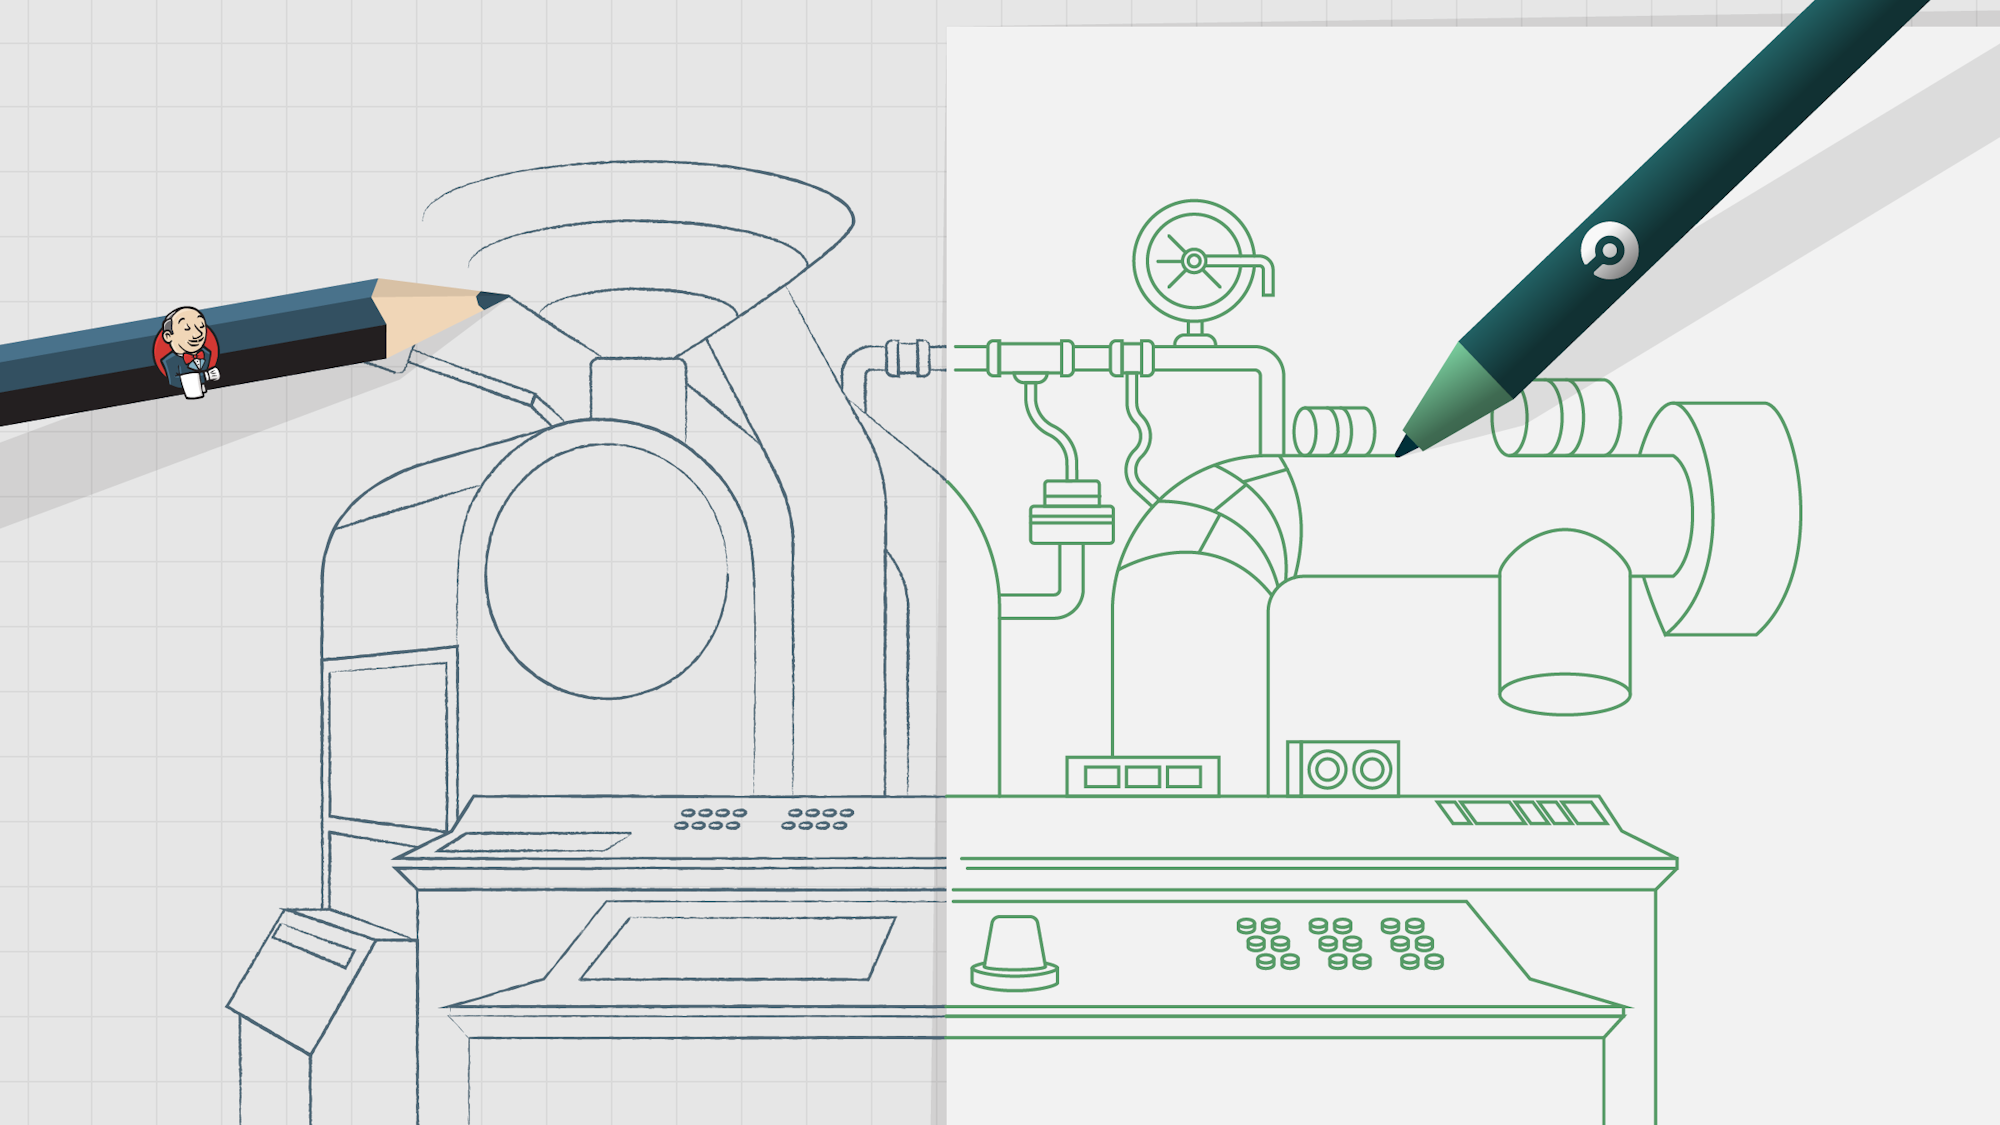 A Jenkins pencil draws the left half of a pipeline contraption, while a green CircleCI pencil completes the drawing on the right.